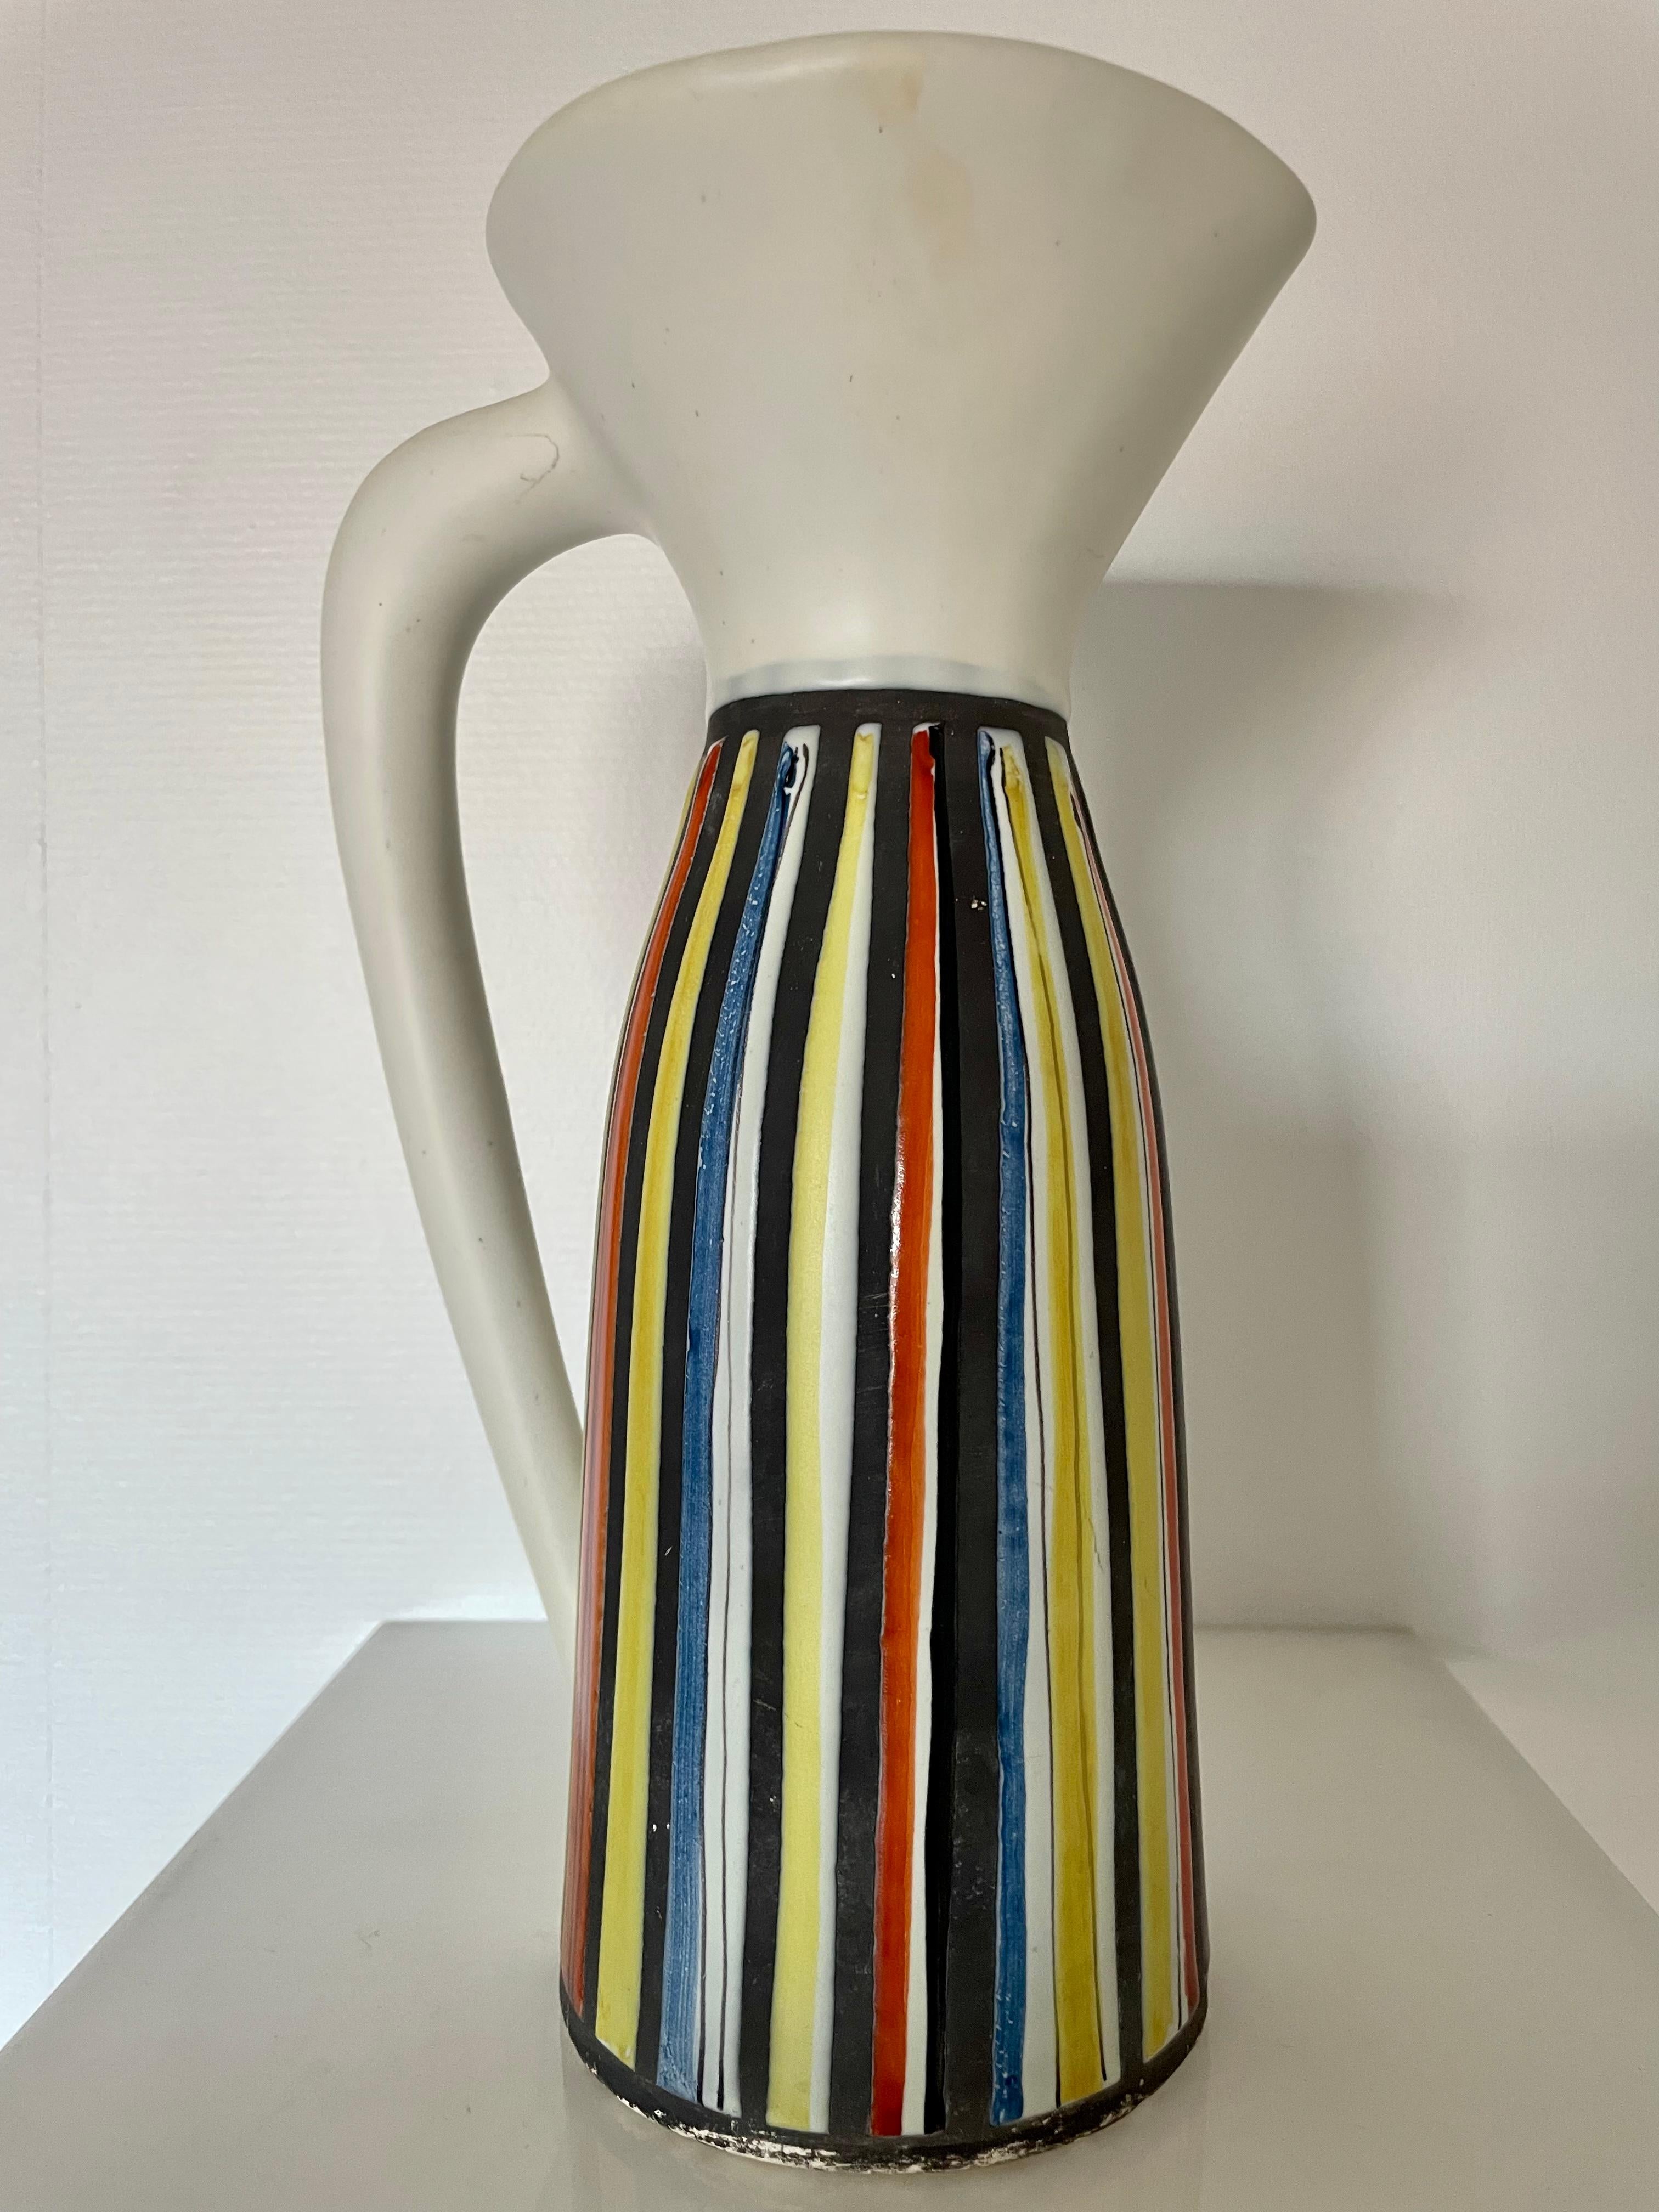 20th Century Ceramic Pitcher Vase by Roger Capron For Sale